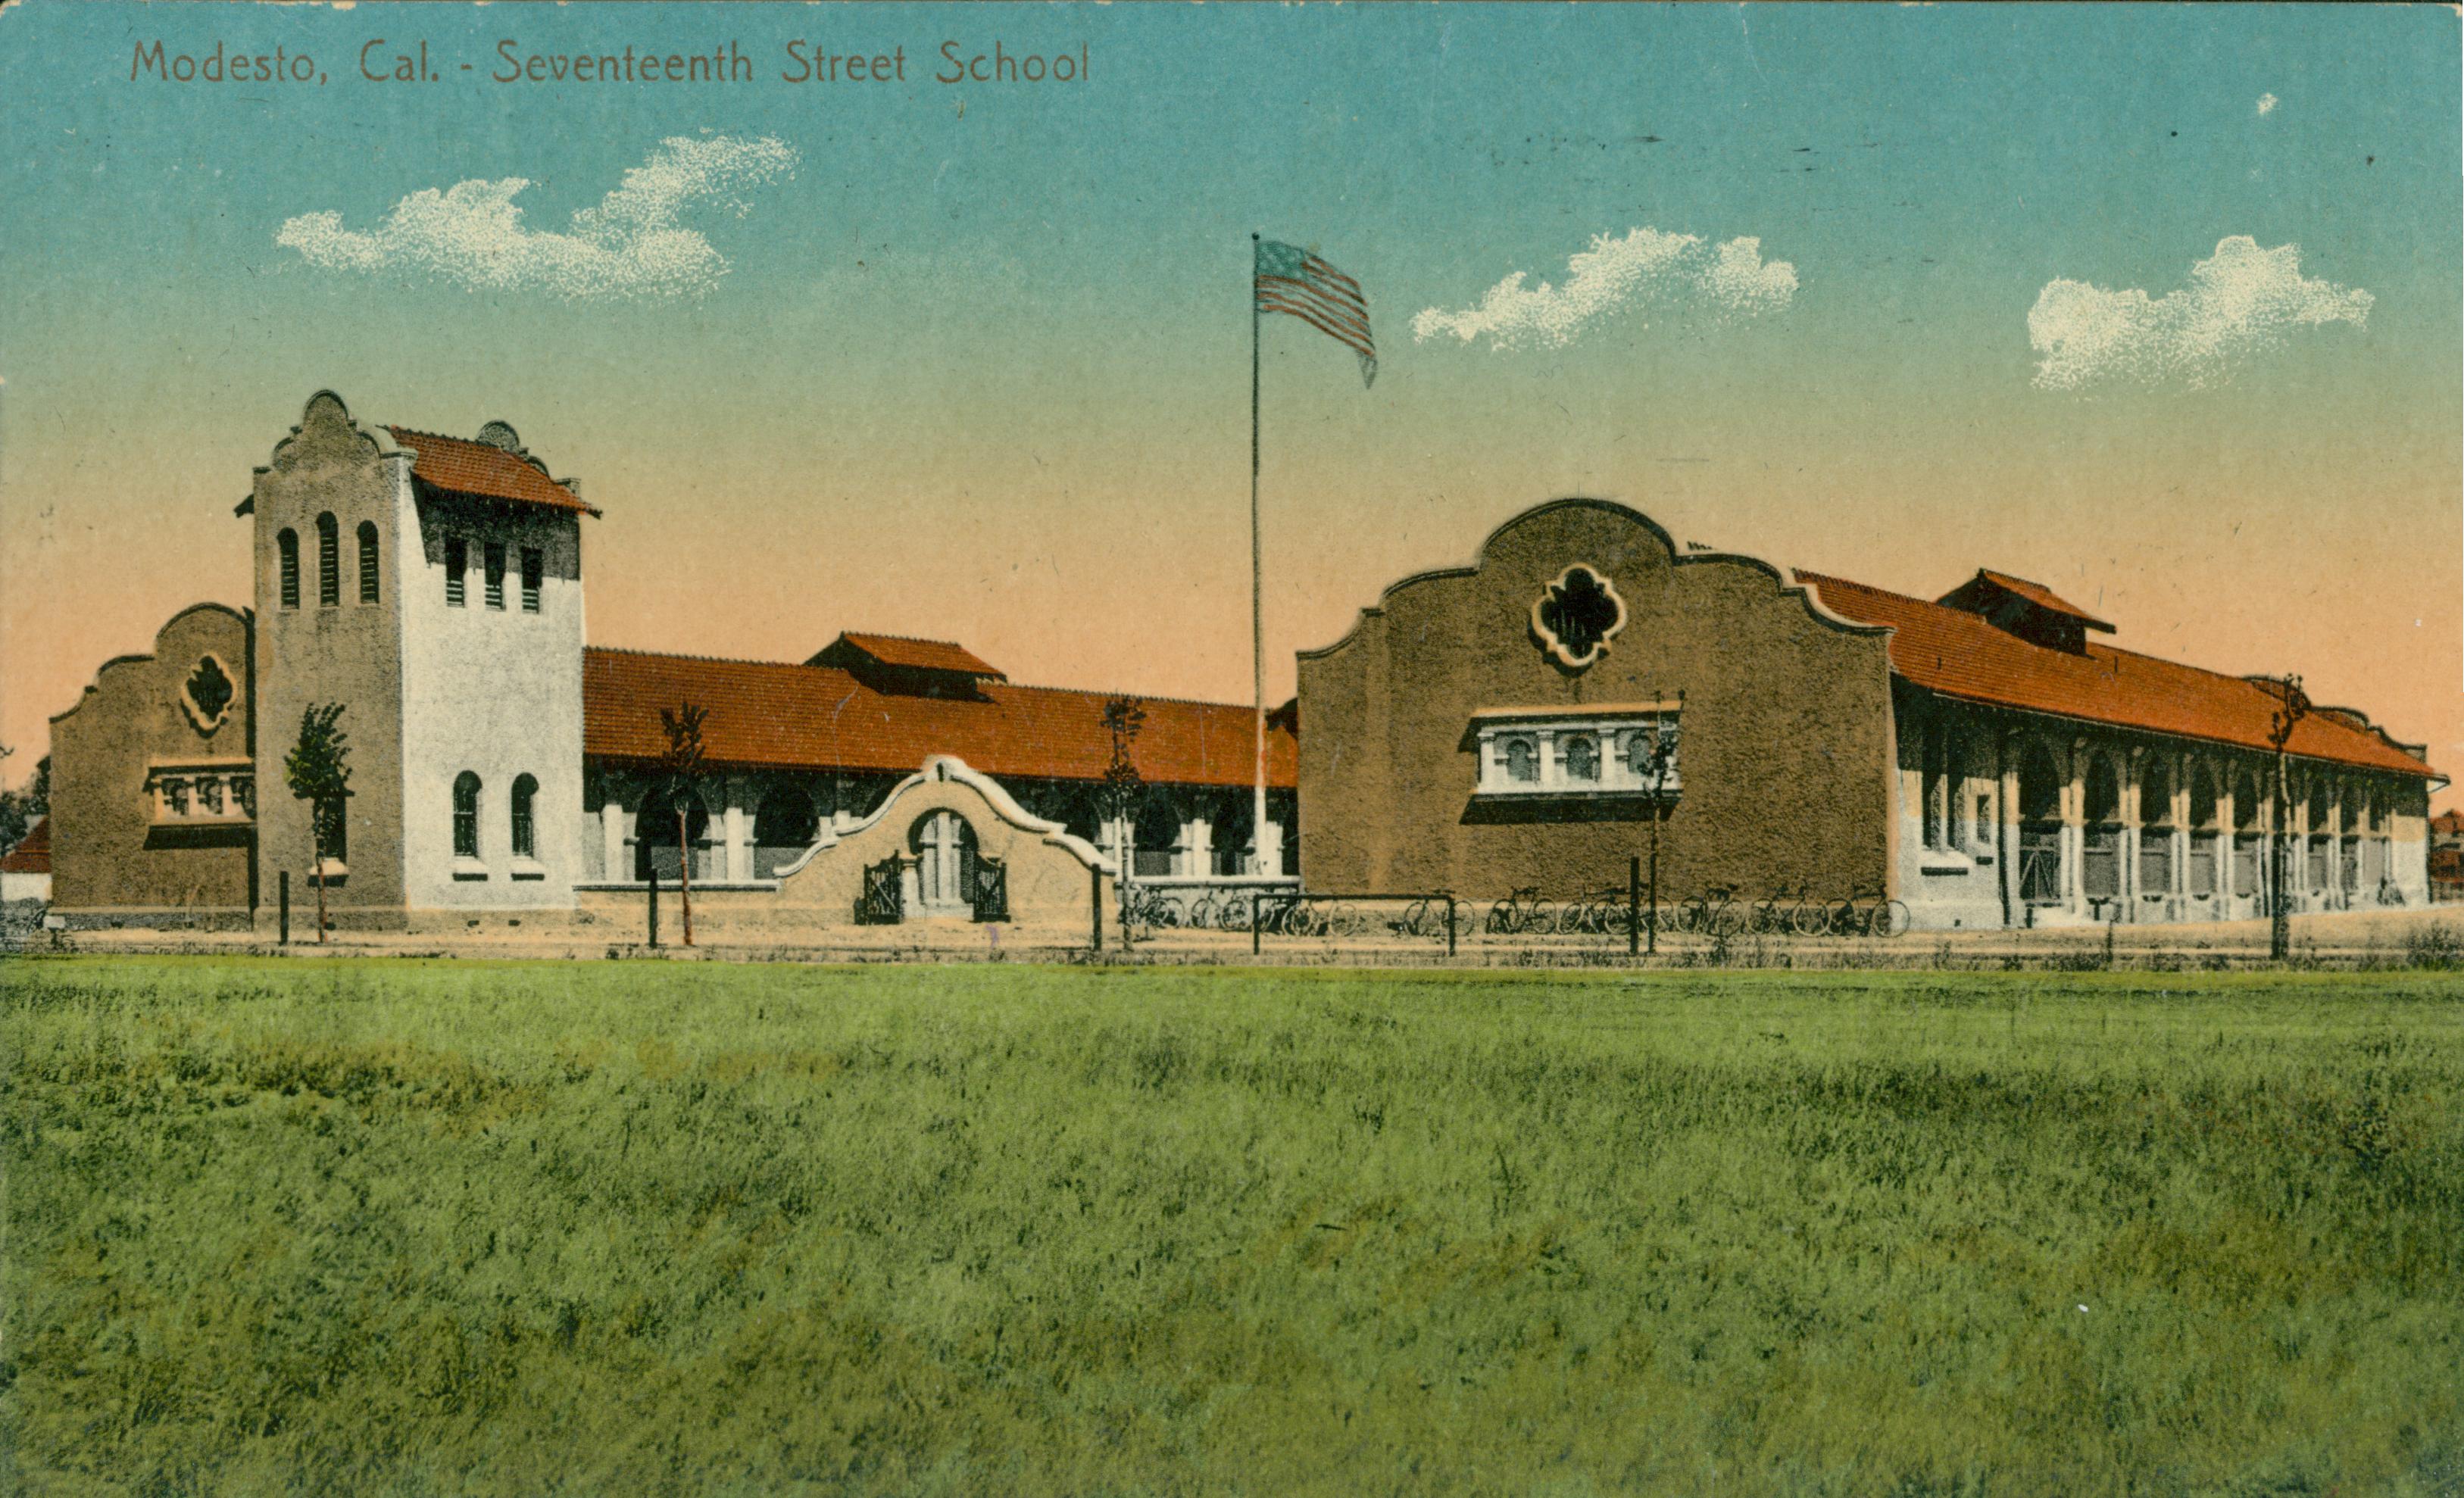 Shows a corner view of the Seventeenth Street School in the middle of an open field with a flag pole out front